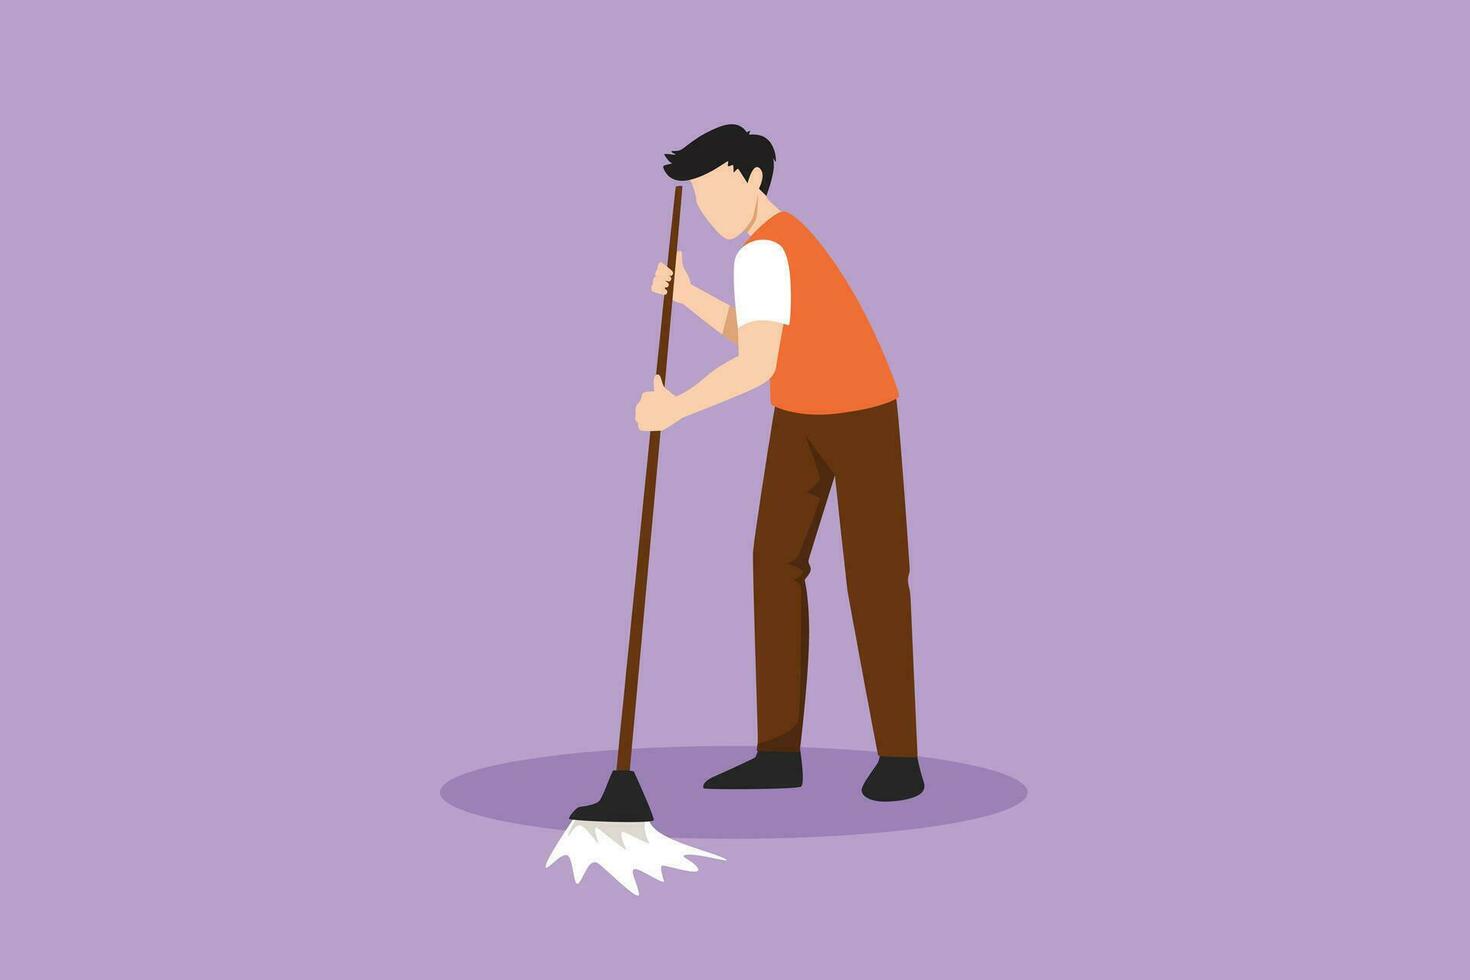 Graphic flat design drawing active young man mopping floor and cleanup indoors. Professional home clean, housework service or housekeeping workers, janitor concept. Cartoon style vector illustration